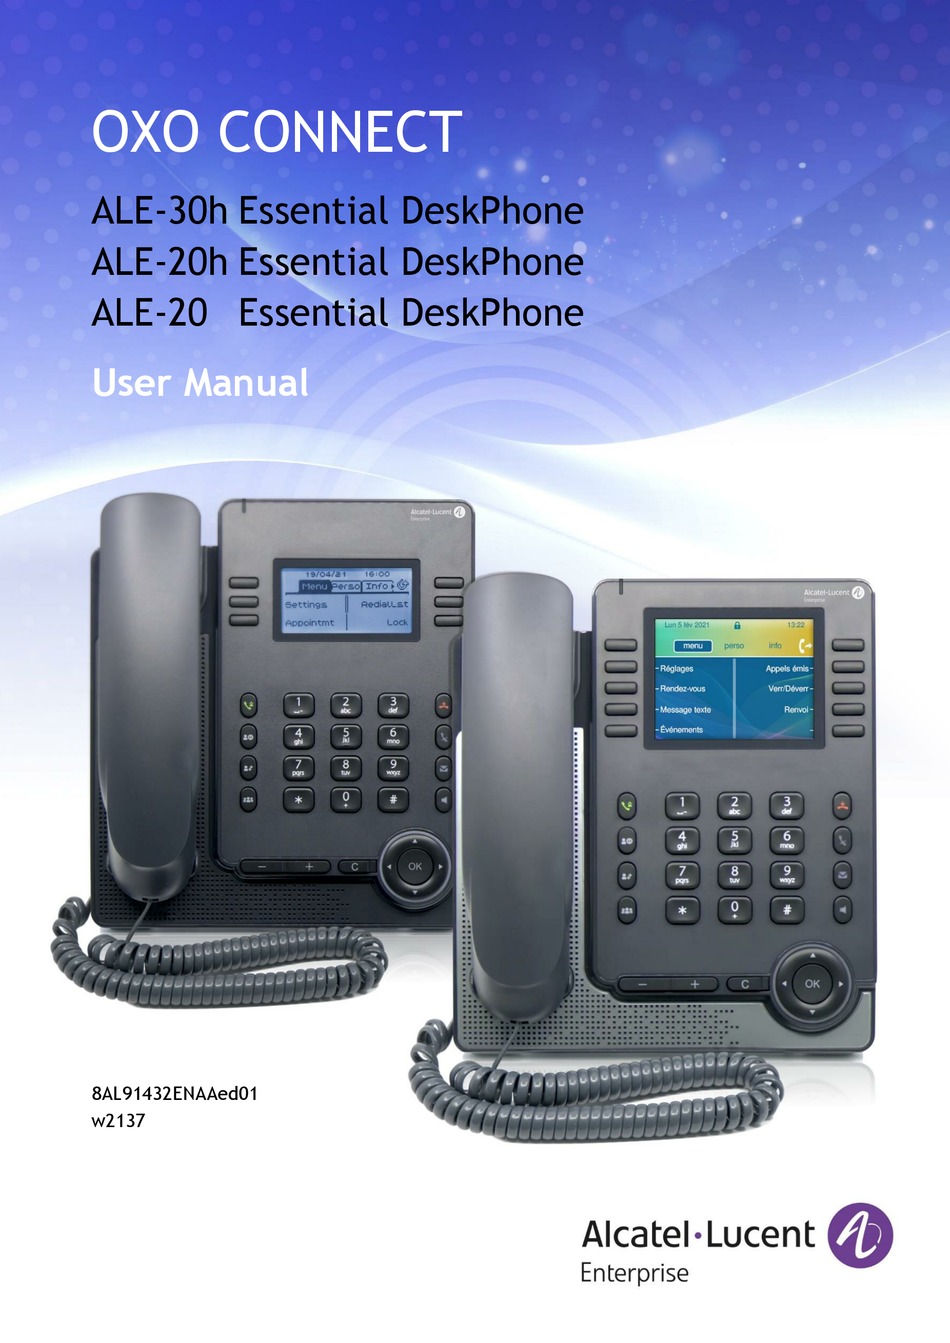 Alcatel-Lucent OmniTouch 4135 IP Conference Phone w/ 2x Microphones 